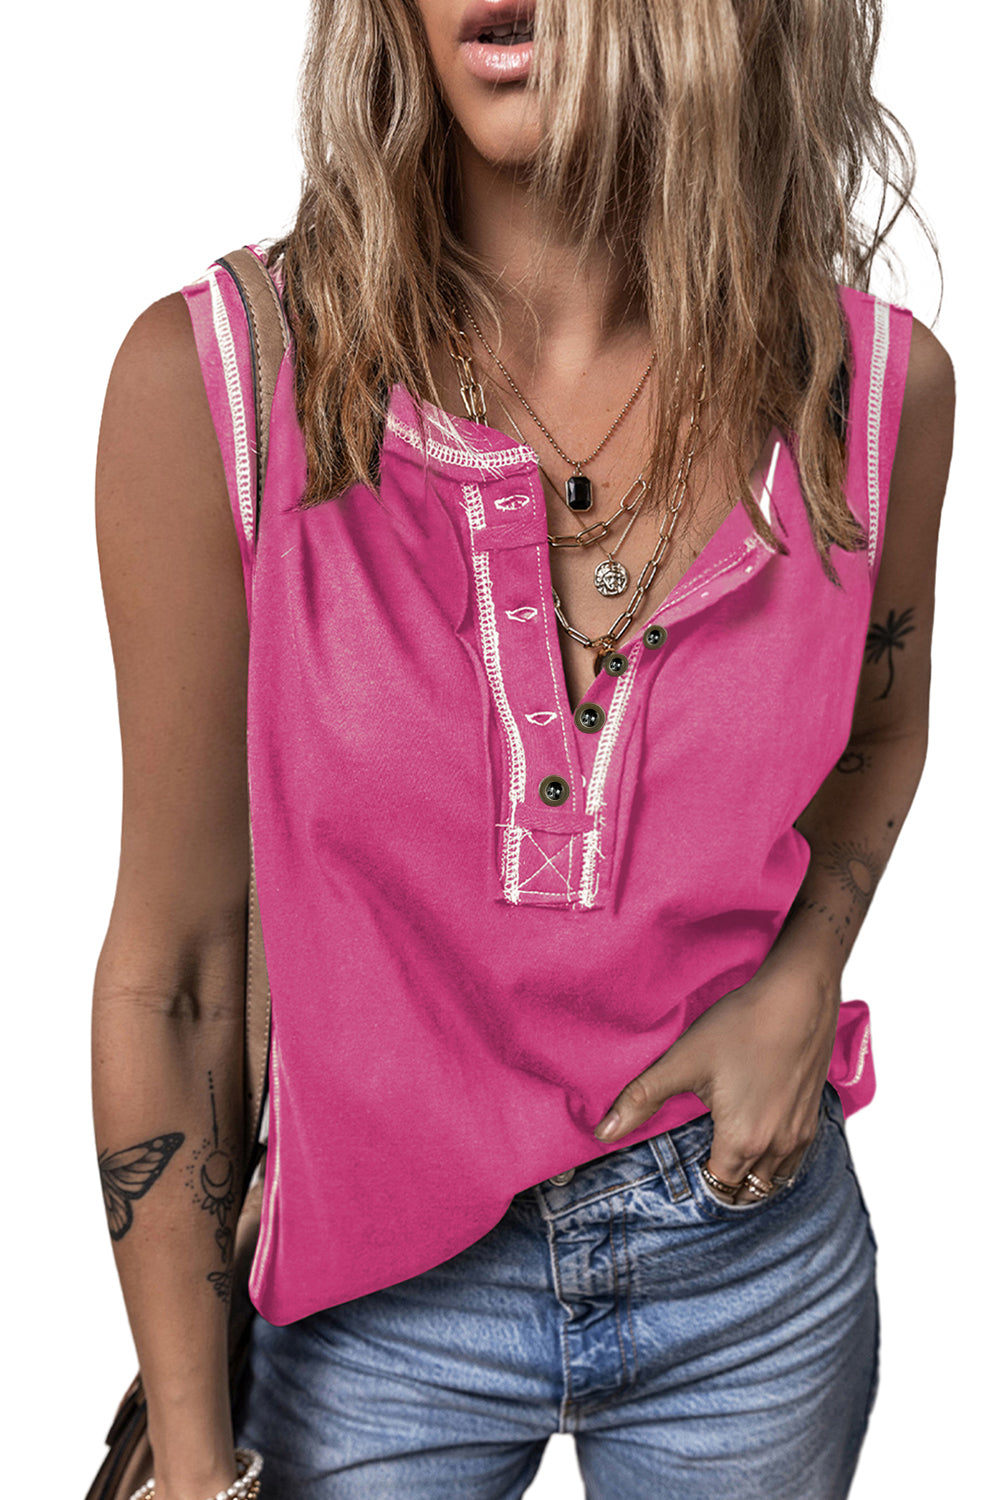 Bright Pink Contrast Stitching Exposed Seam Henley Tank Top Pre Order Tops JT's Designer Fashion